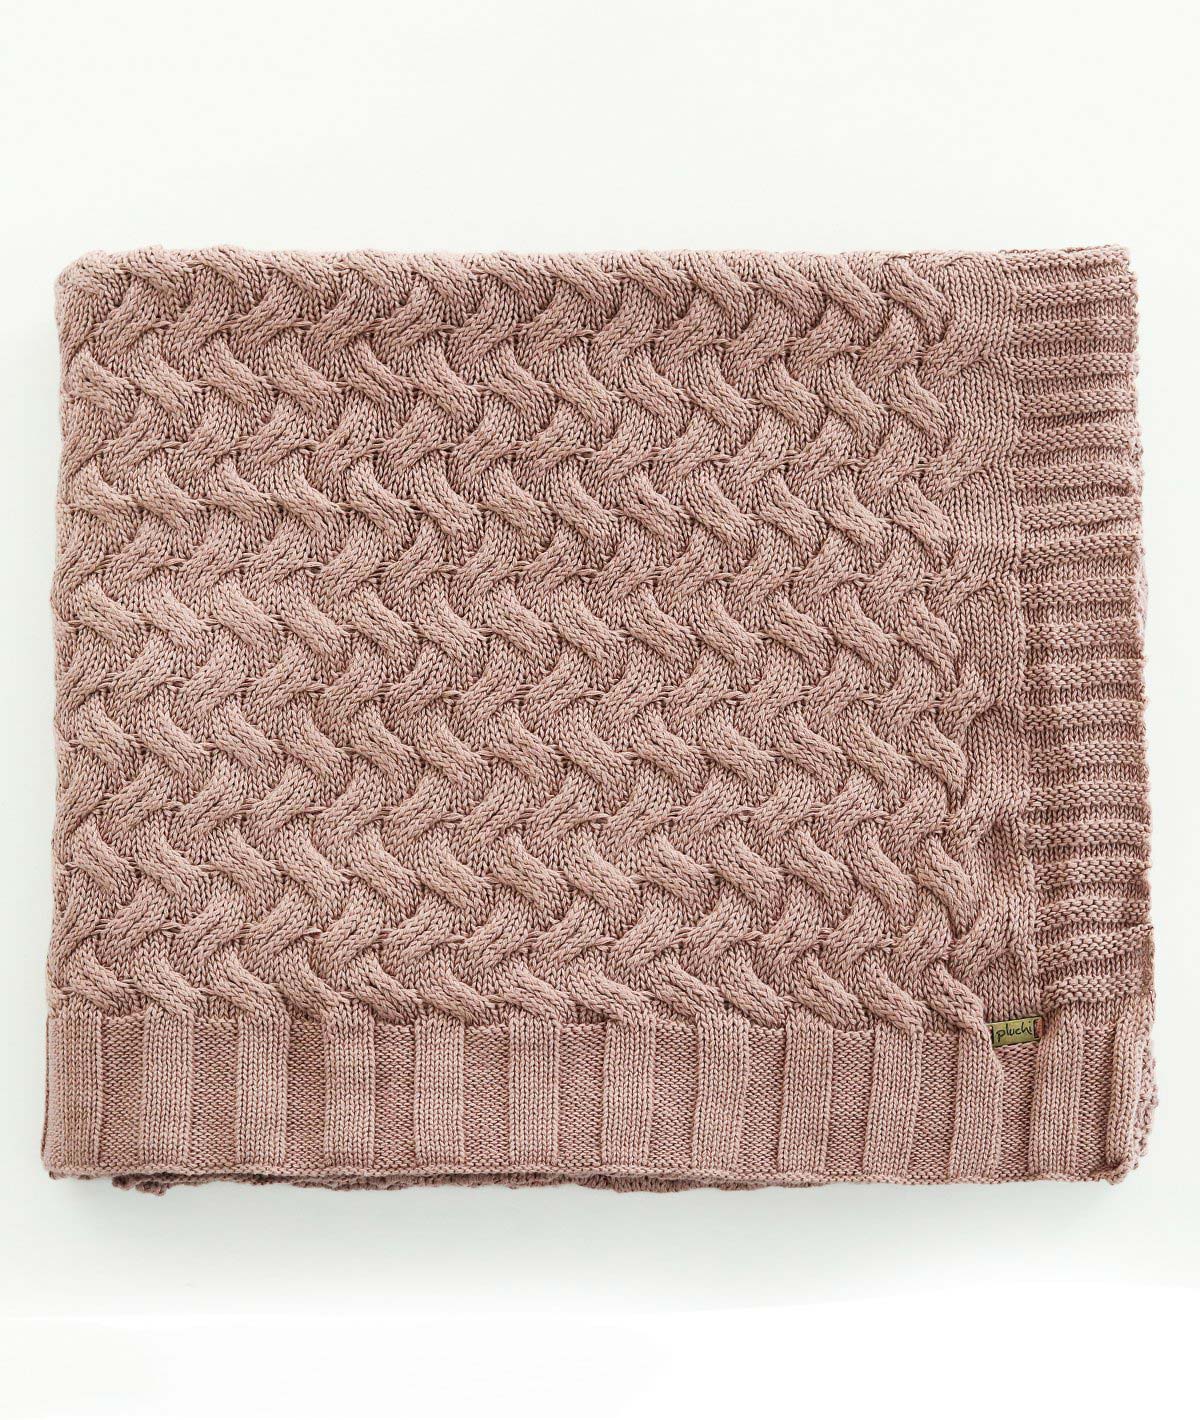 CRISS CROSS - Pewter Color 100% Cotton Knitted All Season AC Throw Blanket